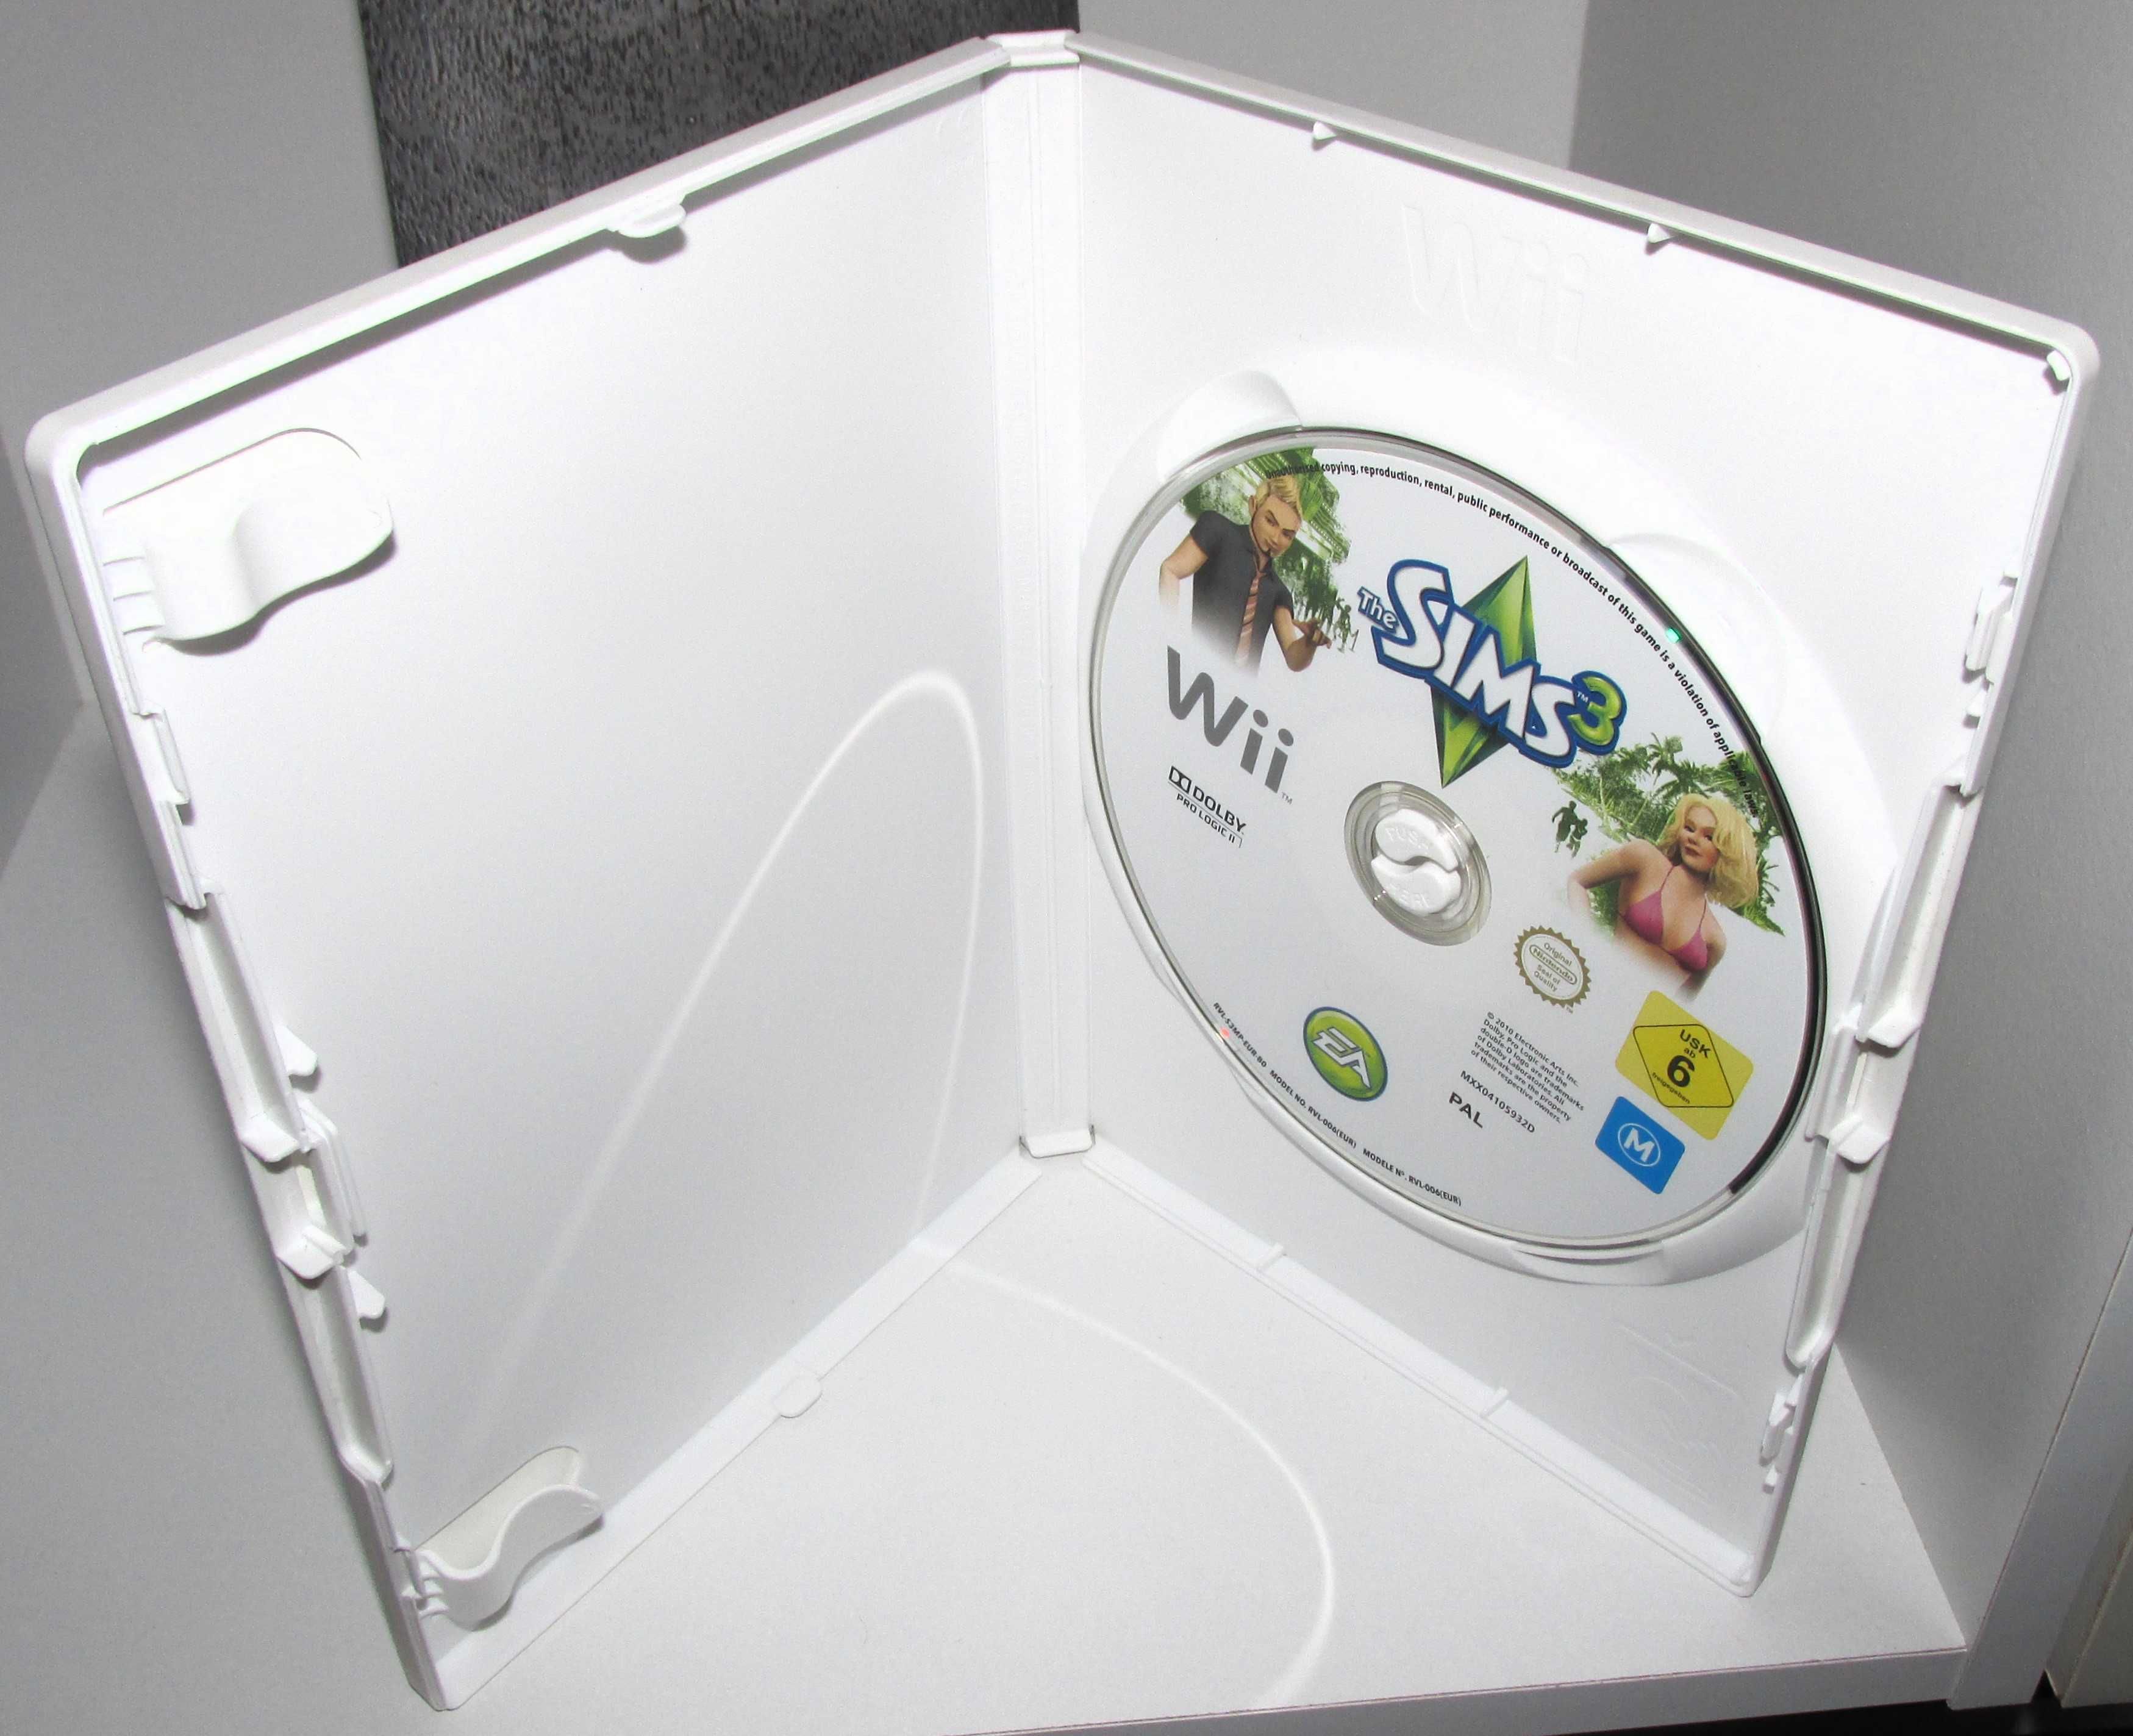 The Sims 3 Jogo Wii